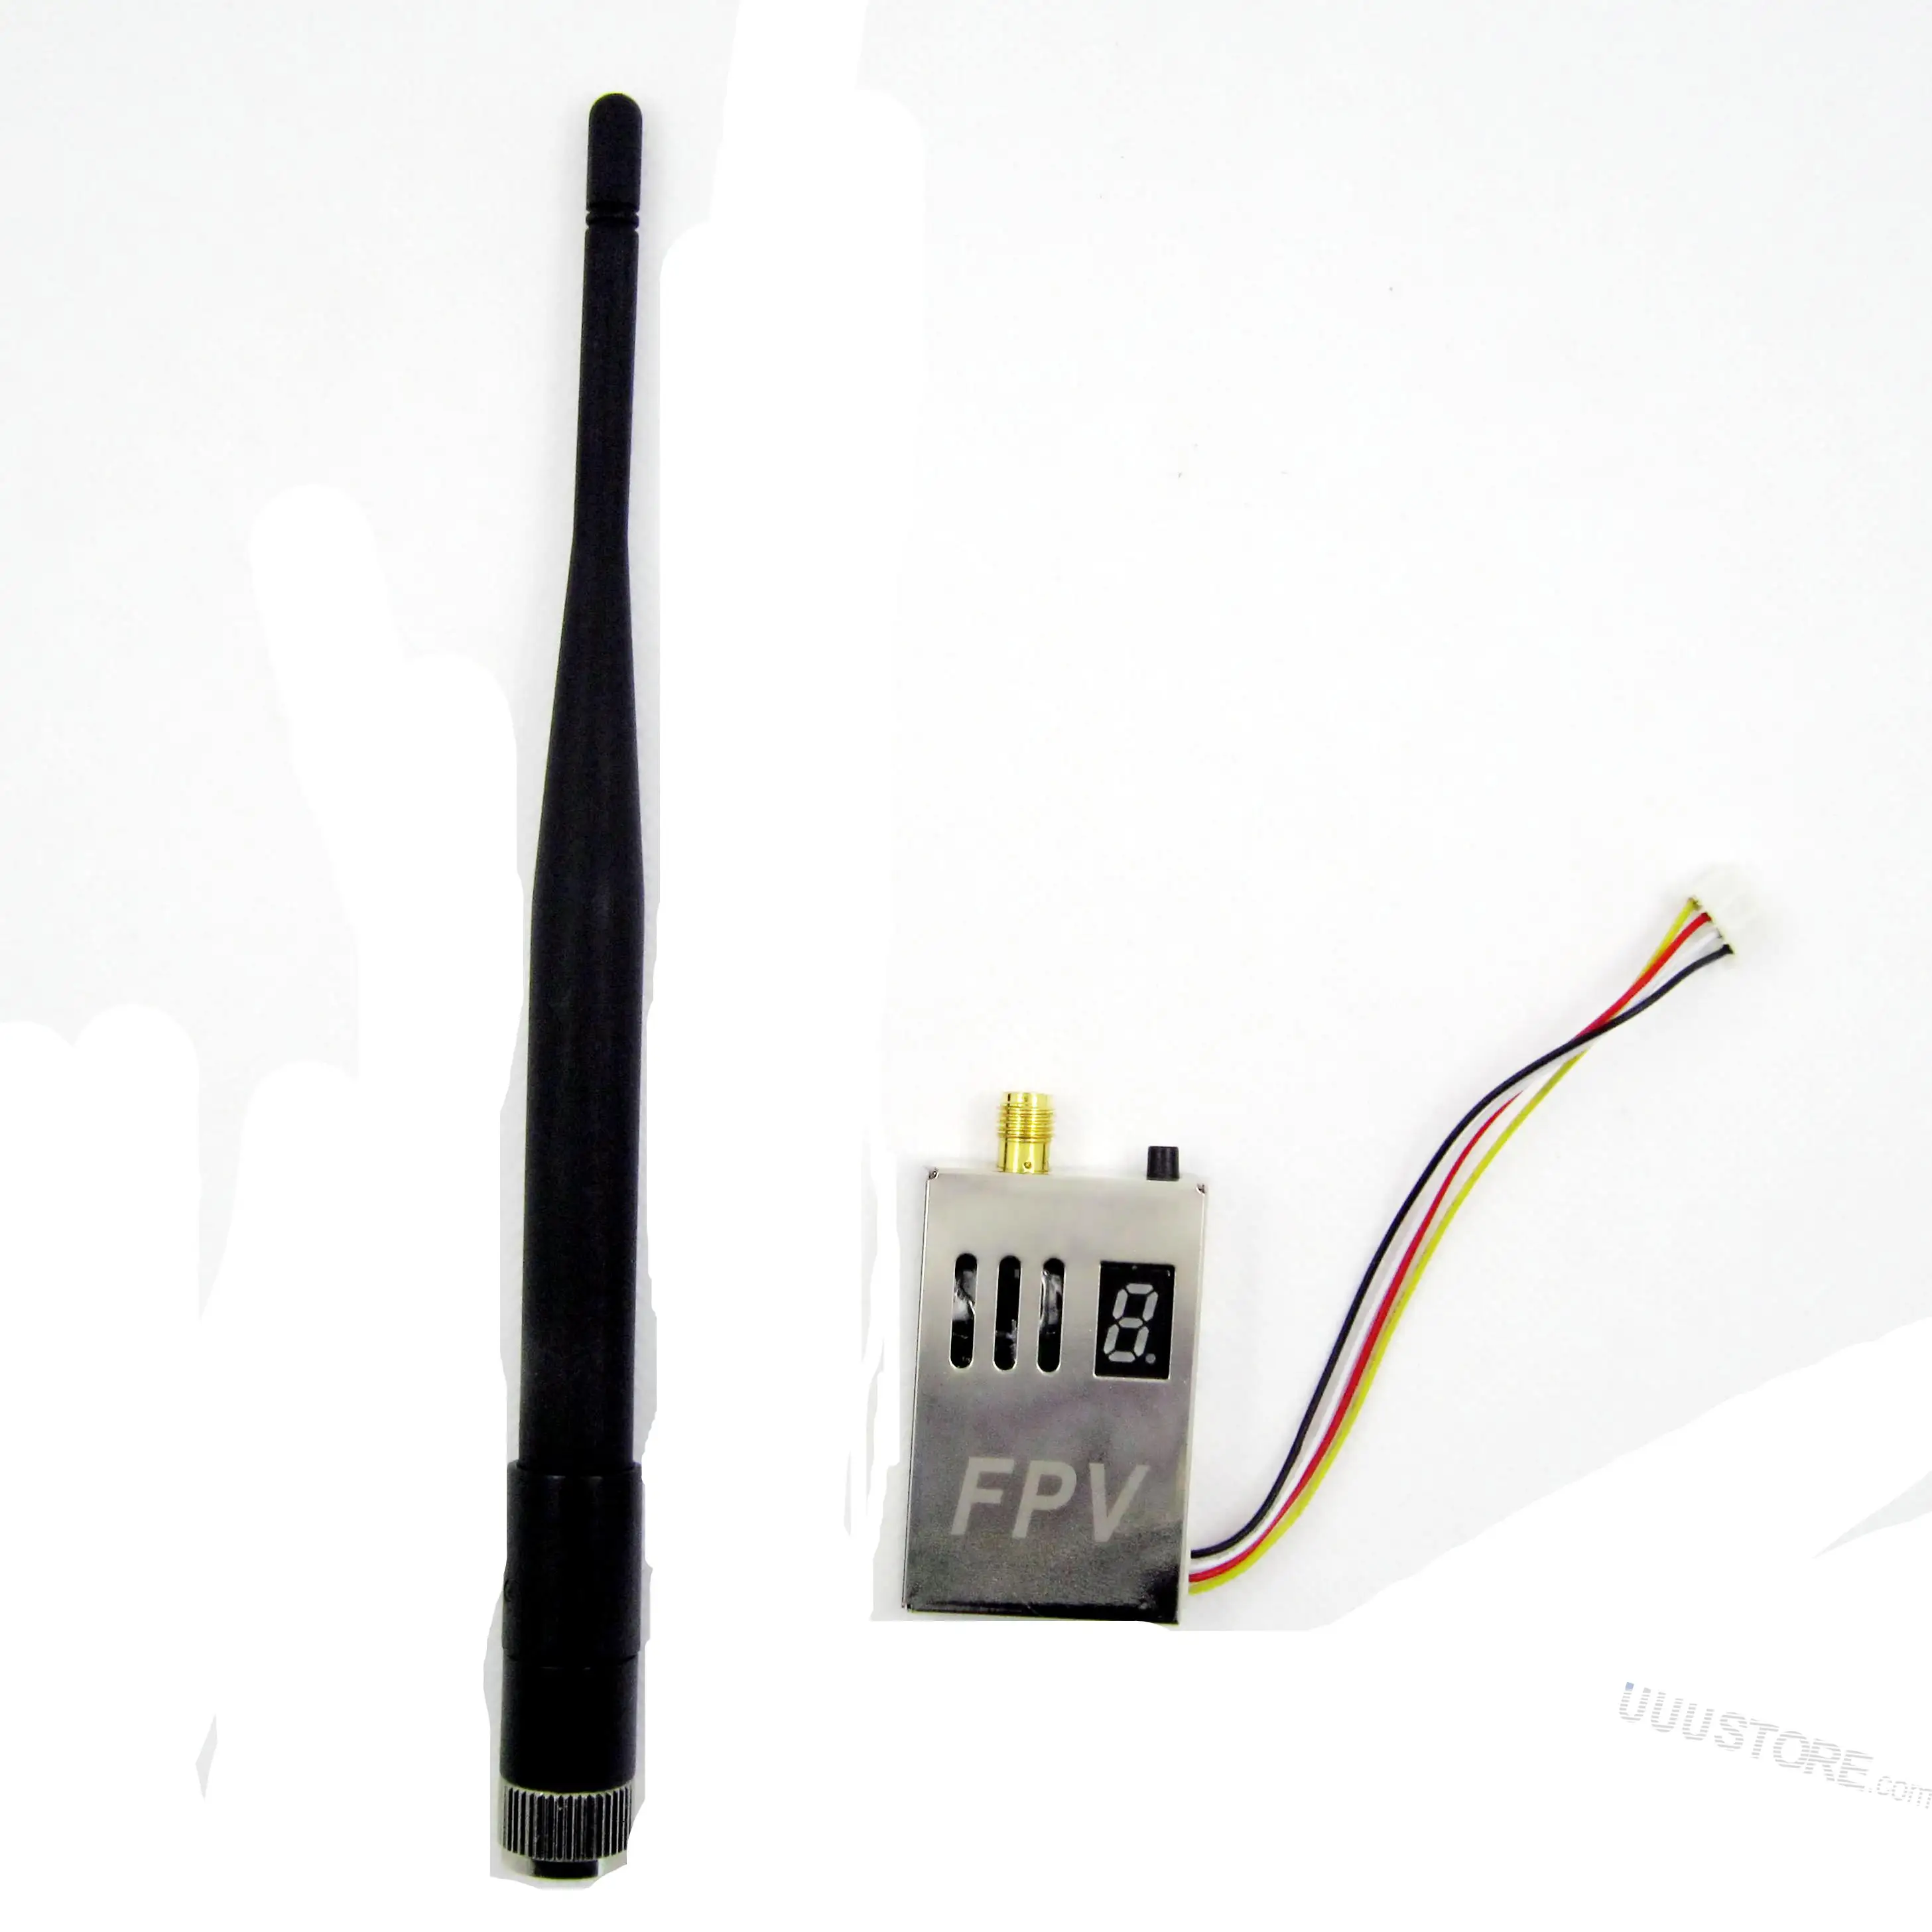 Long-distance video transmission system 1.2Ghz 1.3Ghz 1000mW 4Channel Wireless Transmitter and 12 Channel Receiver Kit 3